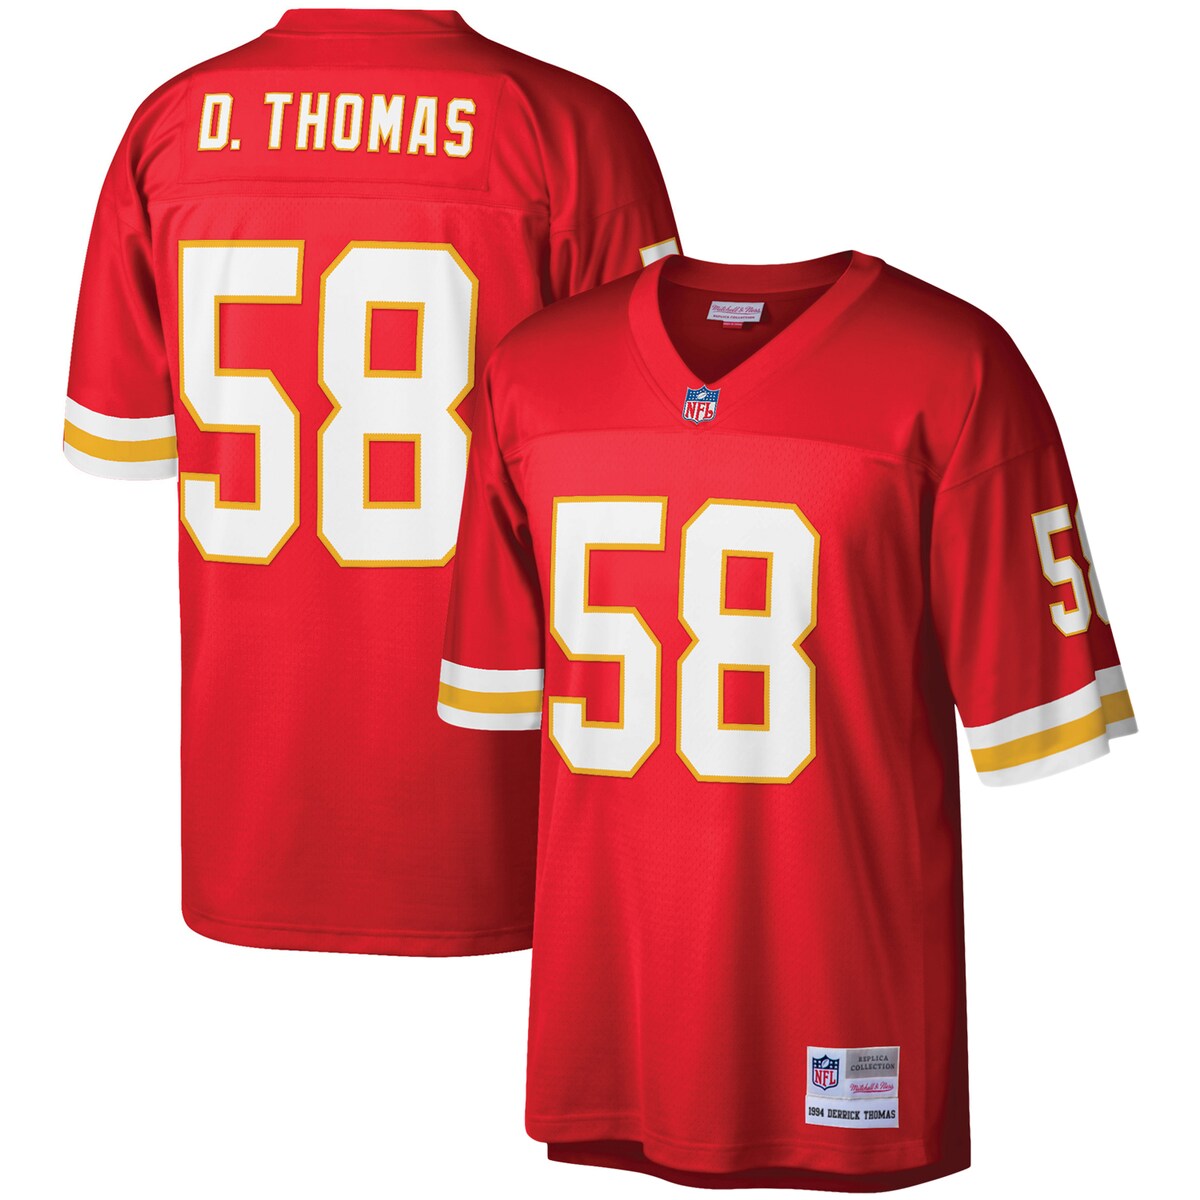 You're a massive Kansas City Chiefs fan and also loved watching Derrick Thomas play. Now you can show off your fandom for both when you get this Derrick Thomas Kansas City Chiefs Legacy replica jersey from Mitchell & Ness. It features distinctive throwback Kansas City Chiefs graphics on the chest and back, perfect for wearing at a home game. By wearing this jersey, you'll be able to feel like you're reliving some of the great plays that Derrick Thomas accomplished to lead the Kansas City Chiefs to glory.Officially licensedFabric applique sewn onSublimated rib-knit sleeve insertsMaterial: 100% PolyesterWoven tags at bottom hemReplicaMesh fabricEmbroidered twill graphicsV-neckShort sleevesImportedMachine wash, line dryBrand: Mitchell & NessSide splits at waist hemEmbroidered NFL Shield at collar